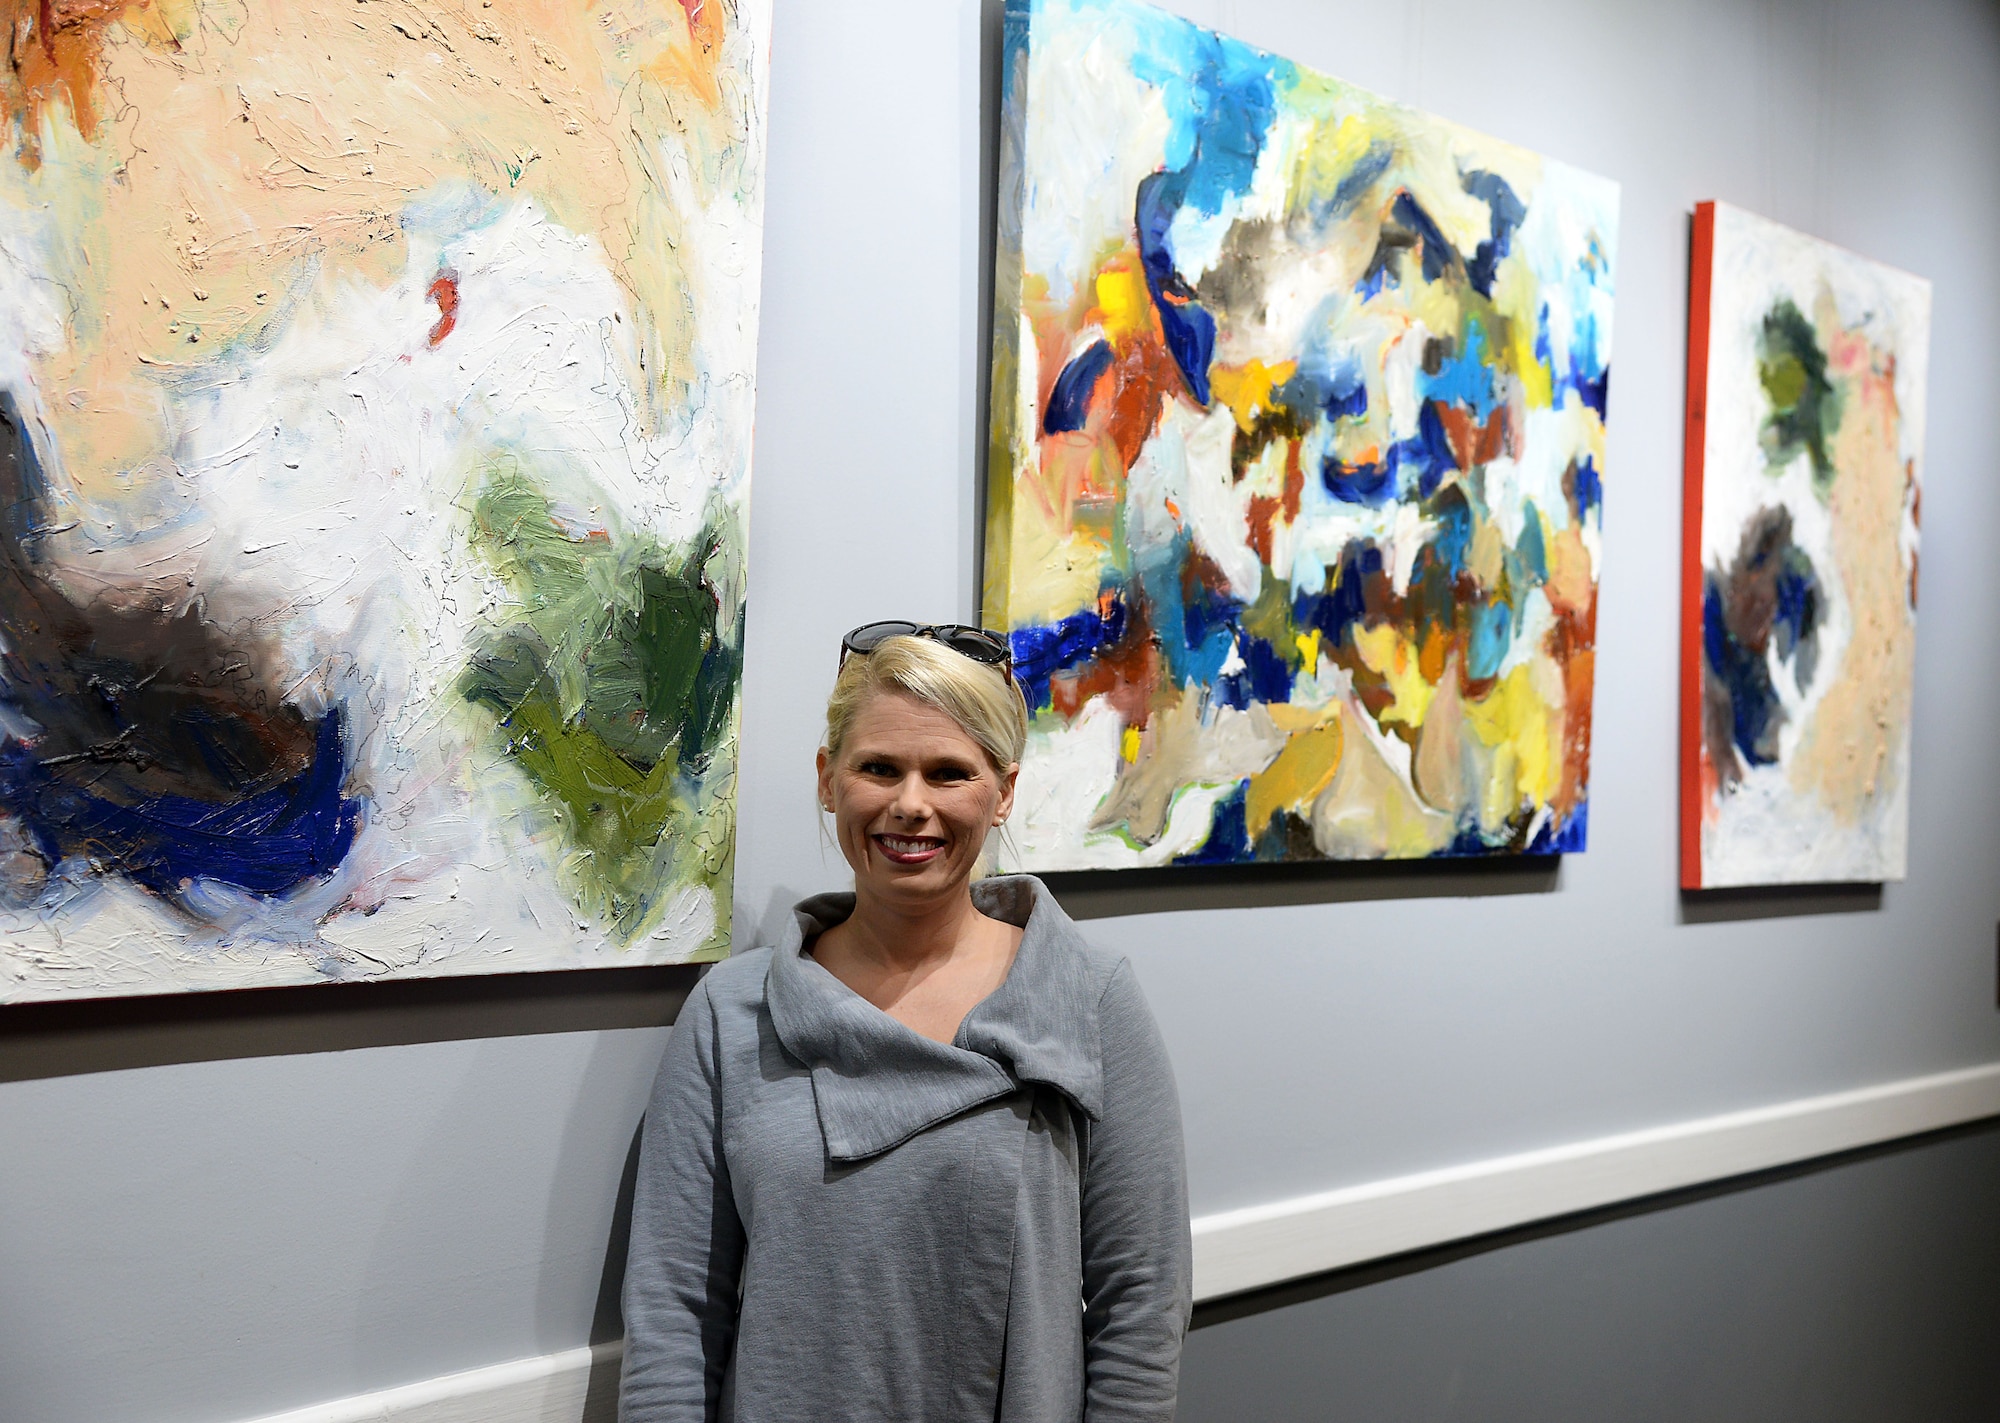 Emmie Sherertz, local artist, stands next to her work Jan. 12, 2018, inside of the Club on Columbus Air Force Base, Mississippi. The Club art gallery was created in 2015 with the opening of the newly renovated Club. The Columbus Arts Council switches the art out roughly every two months, providing six artists a year to showcase their work to the Columbus AFB service members and family. (U.S. Air Force photo by Airman 1st Class Keith Holcomb)